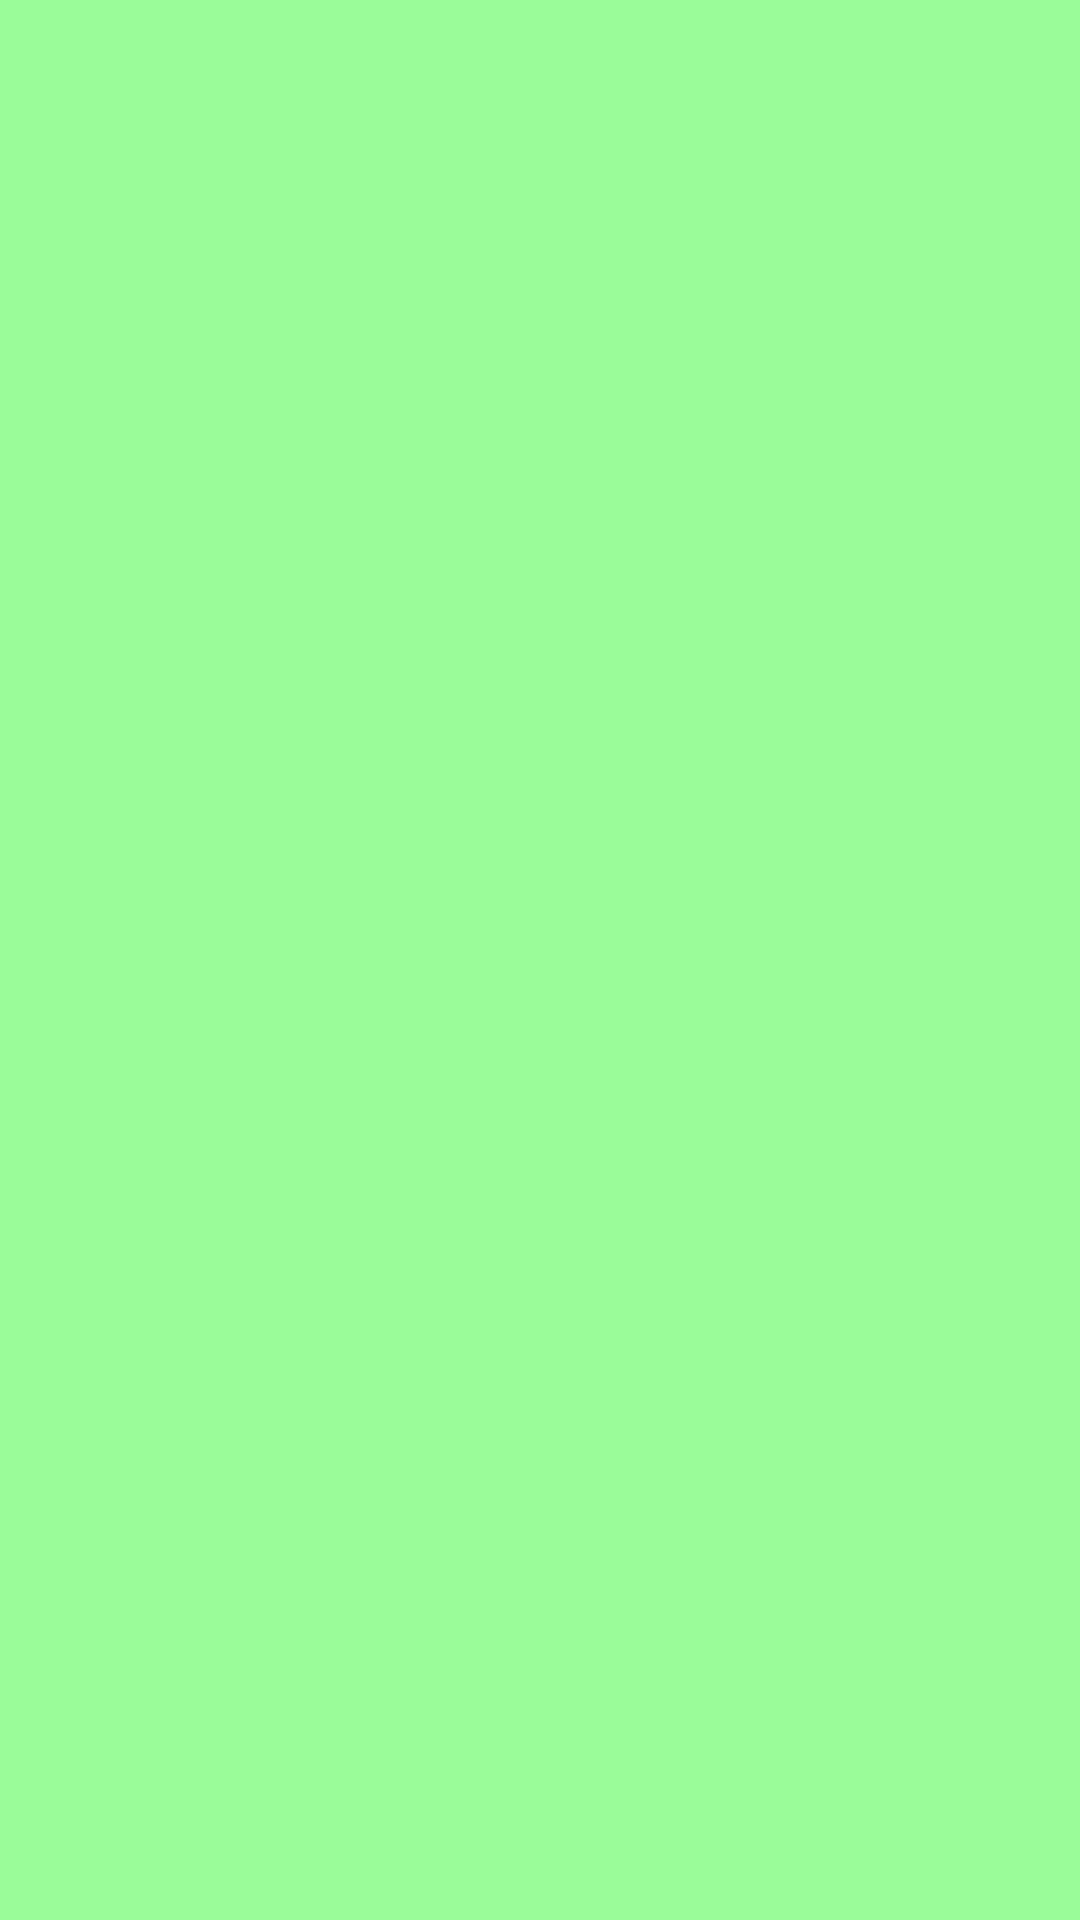 1080x1920 Pale Green Solid Color Background